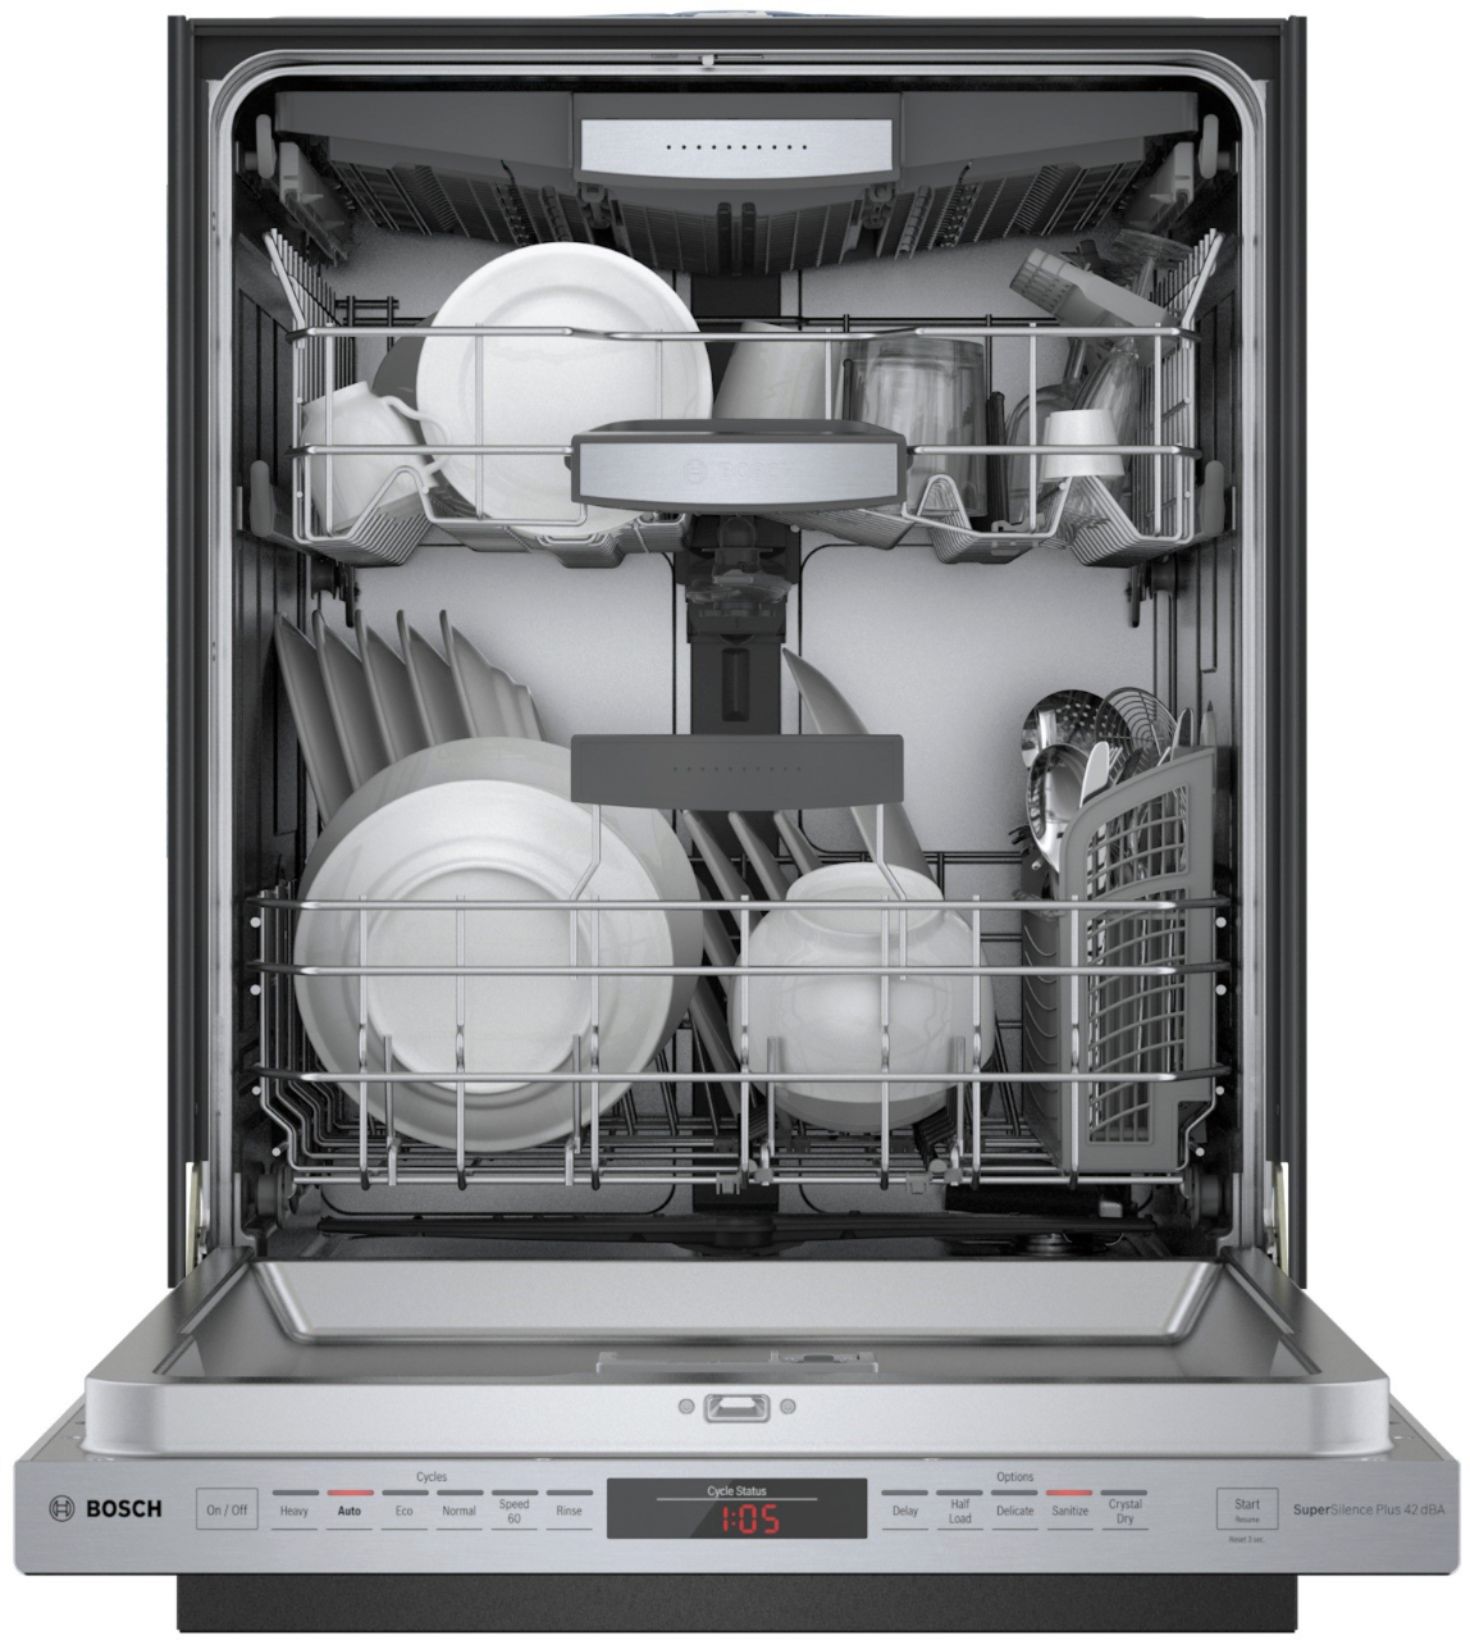 Bosch 500 Series 24" Top Control Built-In Dishwasher with AutoAir, Steel Tub, 3rd Rack, 44 dBa Stainless steel SHPM65Z55N - Best Buy